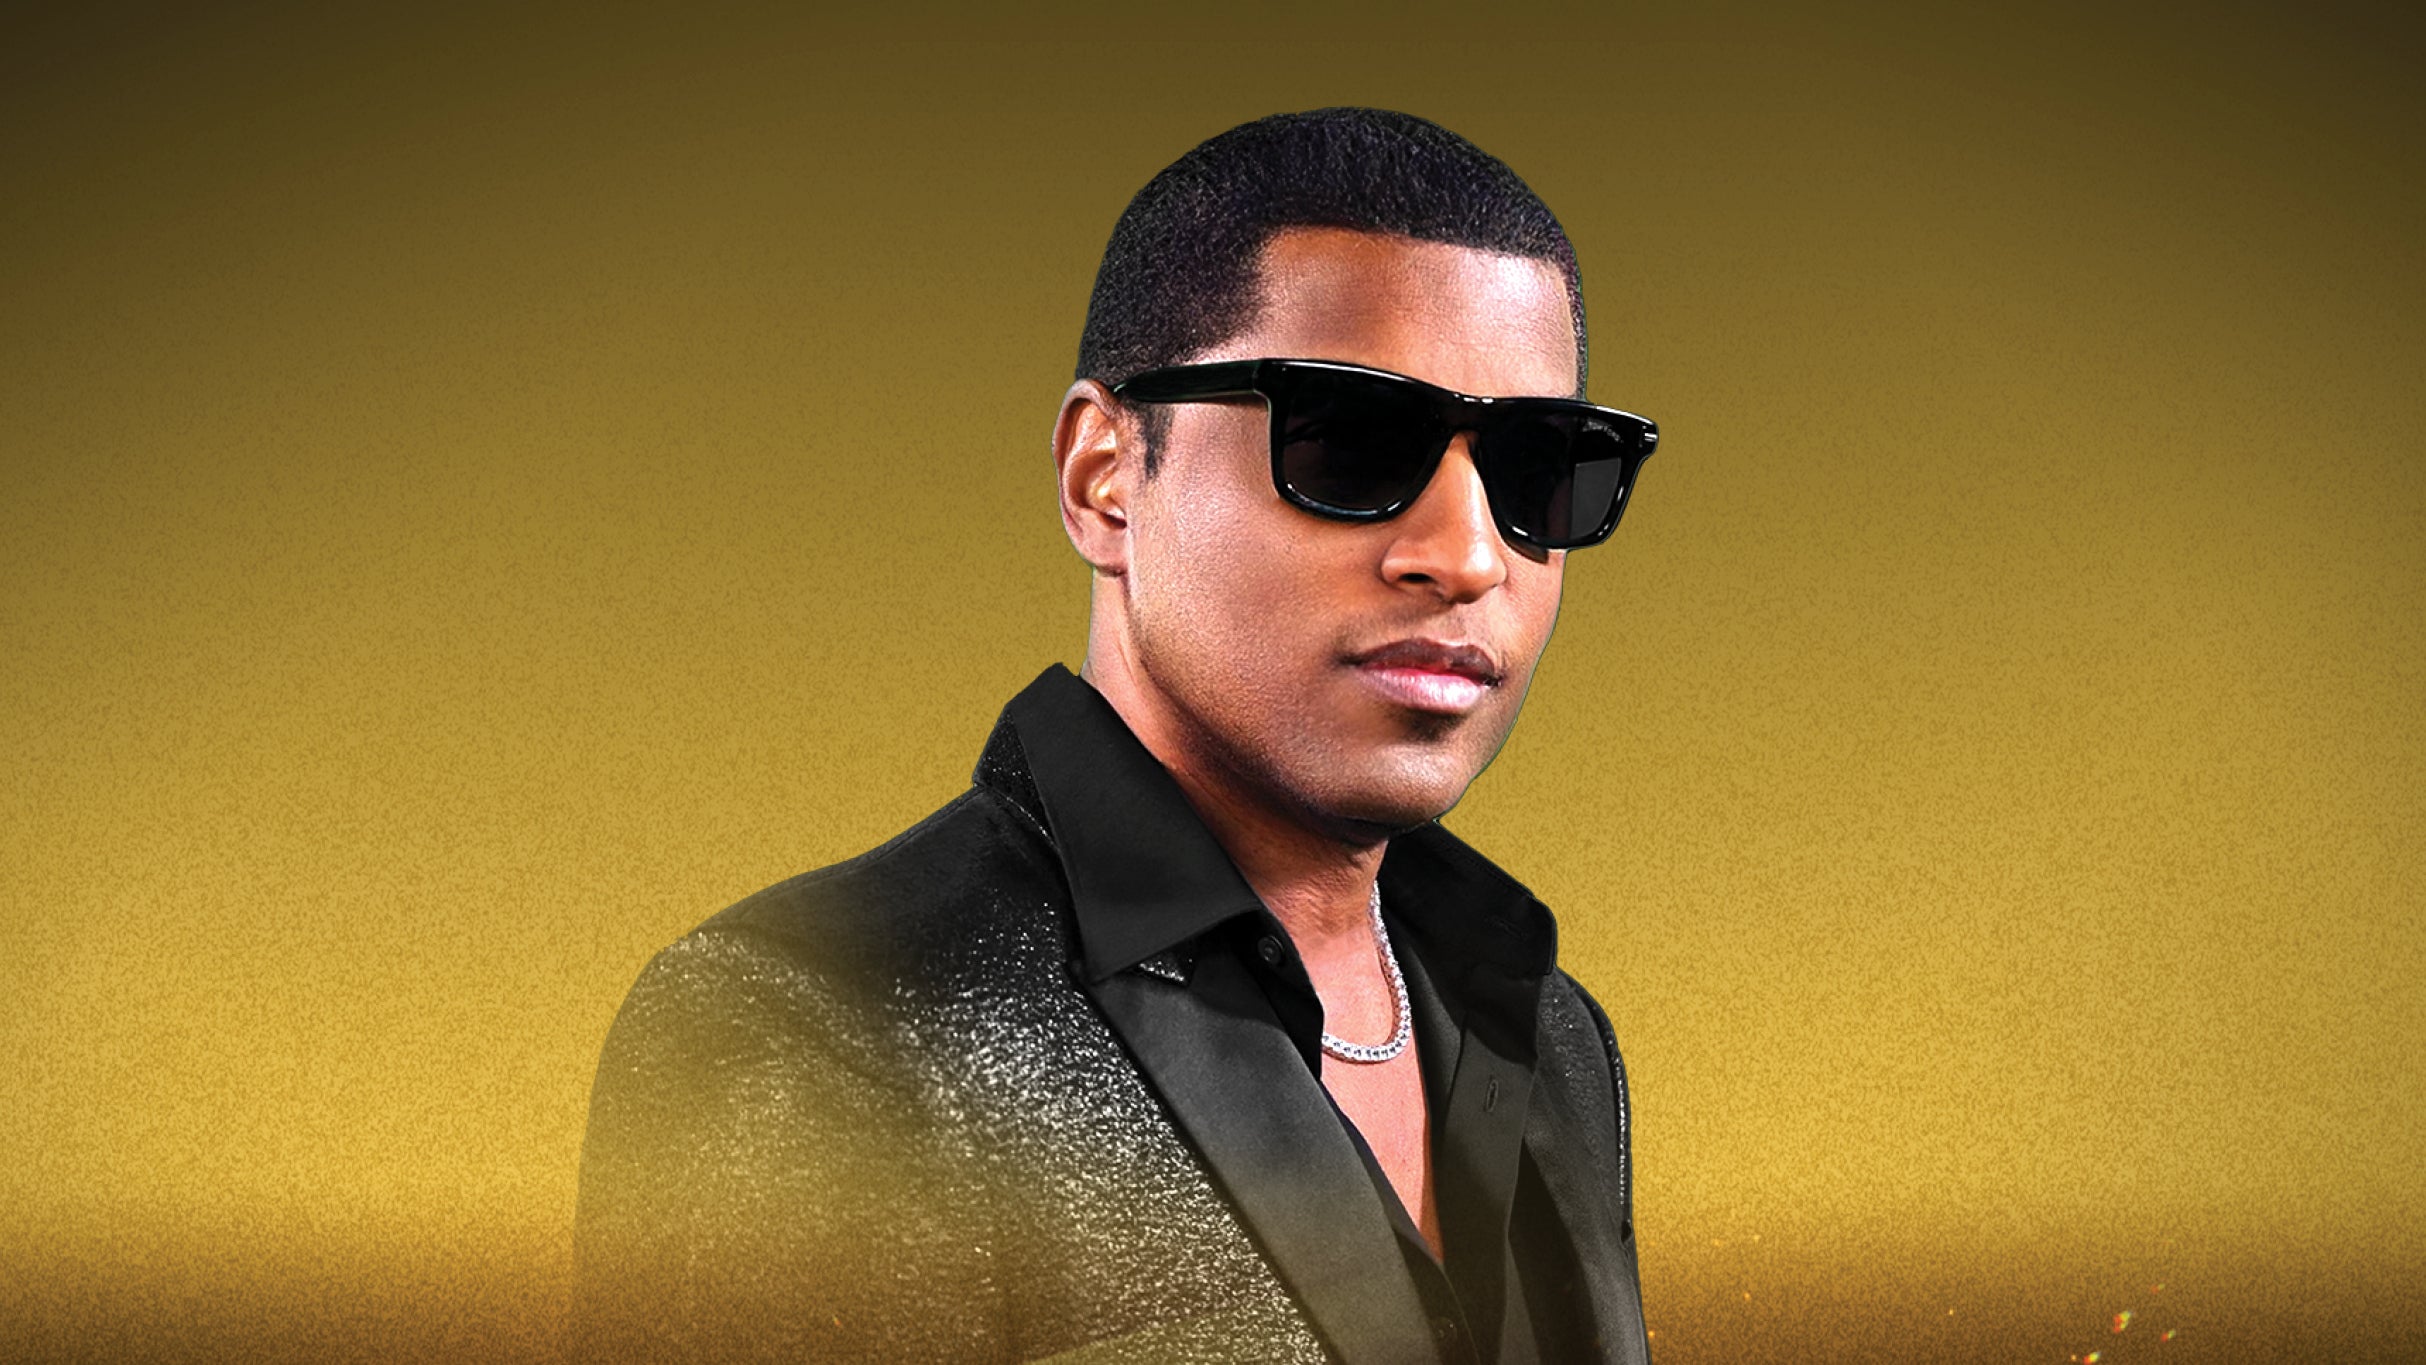 Babyface at The Event at Graton Resort & Casino